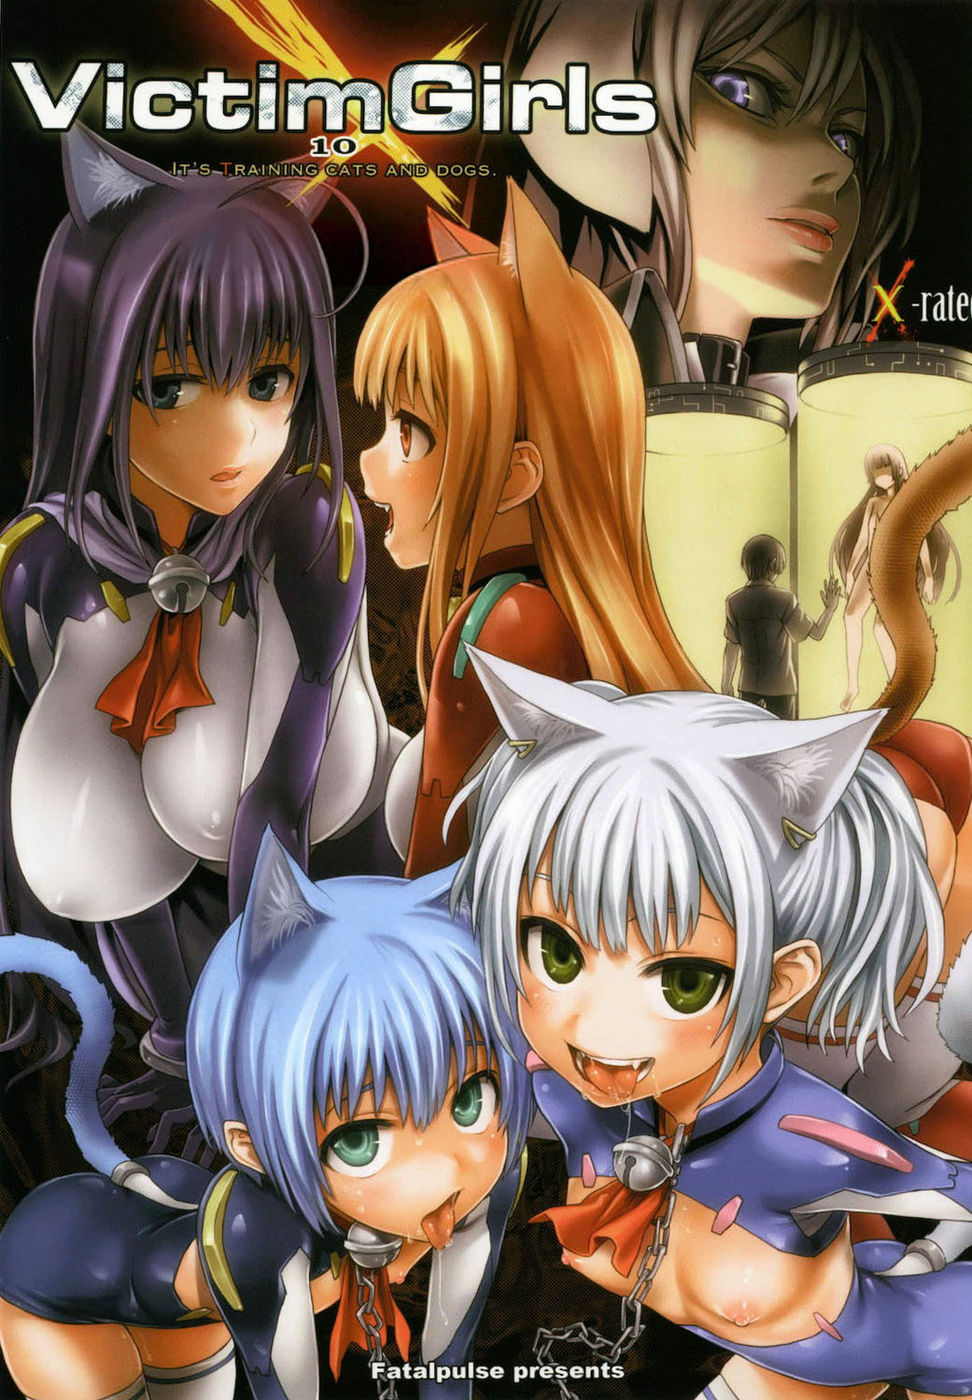 Victim Girls 10 - It's Training Cats And Dogs-Read-Hentai Manga Hentai Comic  - Online porn video at mobile